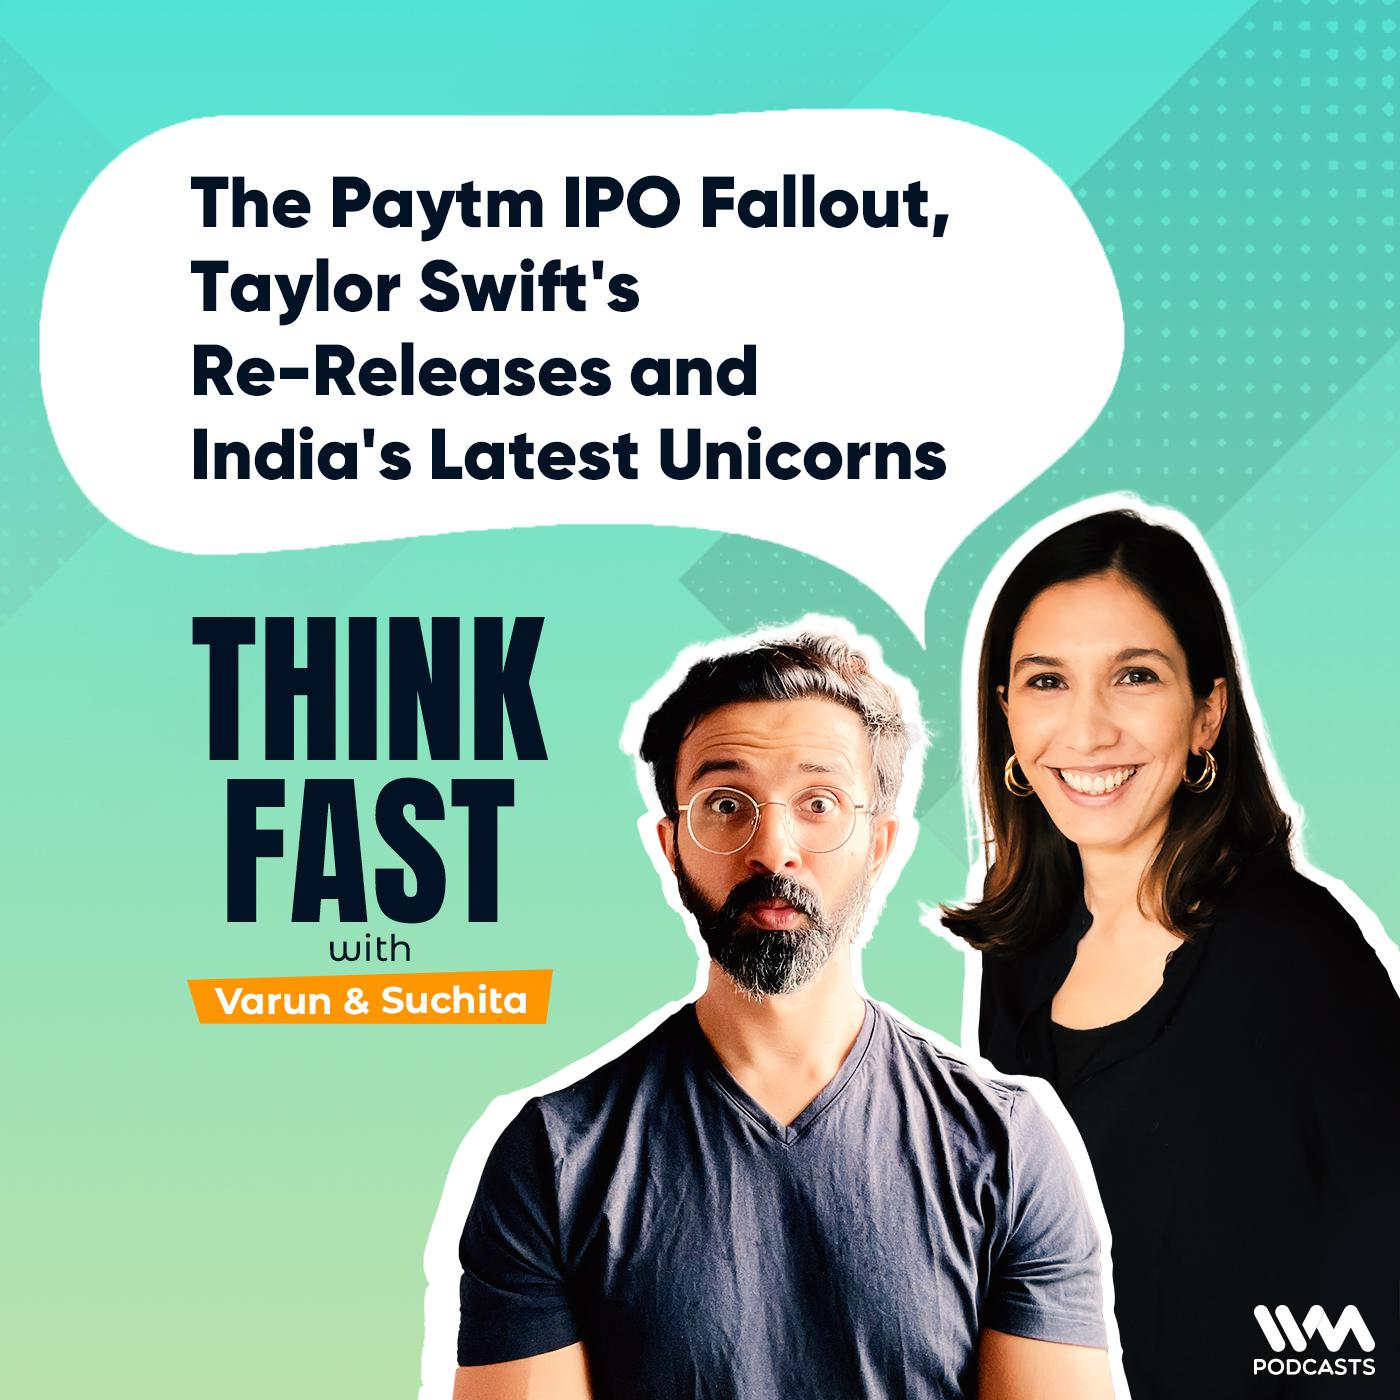 The Paytm IPO Fallout, Taylor Swift's Re-Releases and India's Latest Unicorns